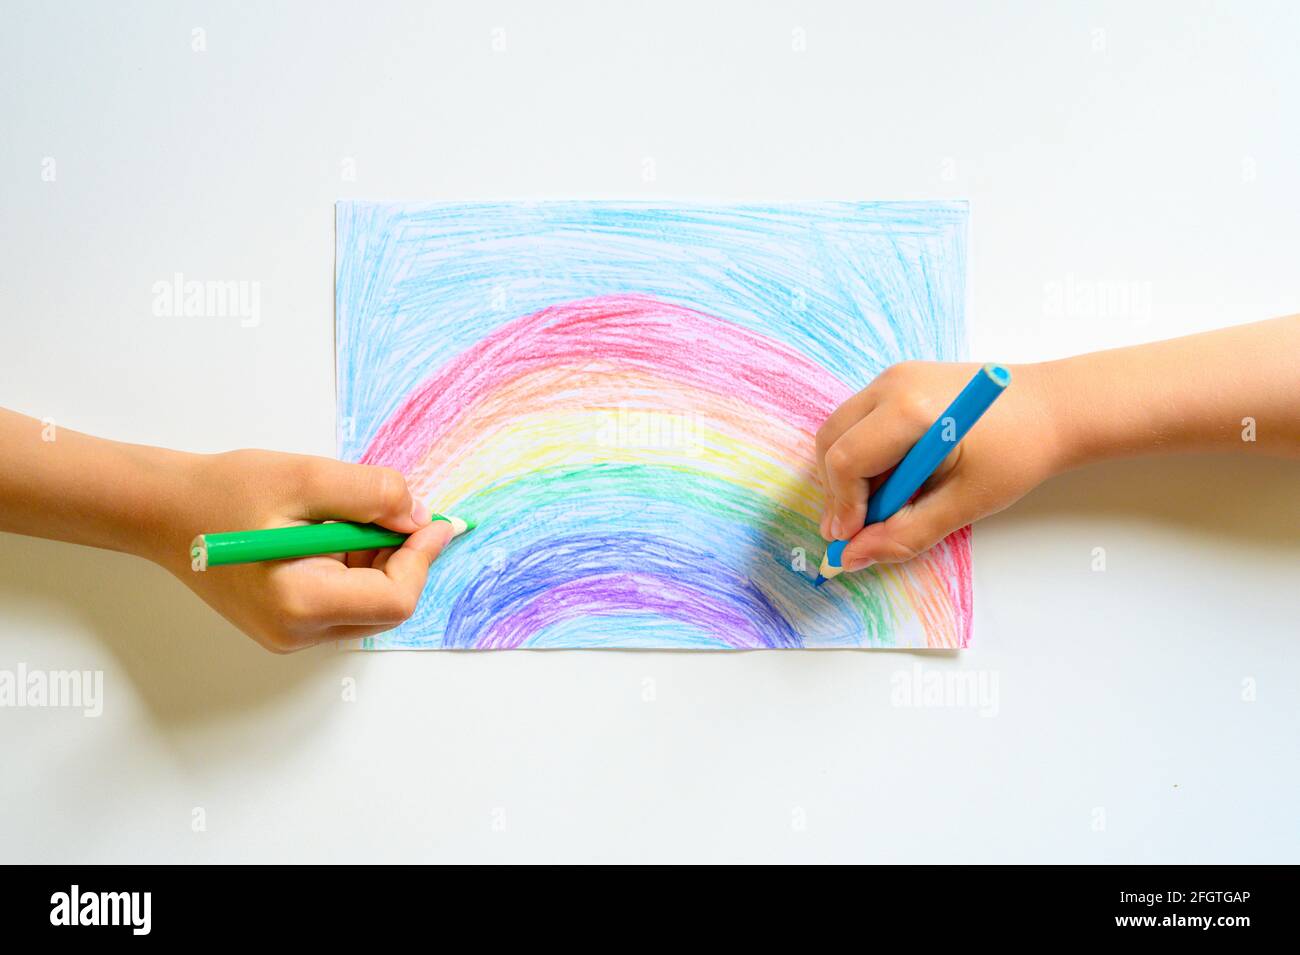 How to draw a RAINBOW / Watercolor Pencils 